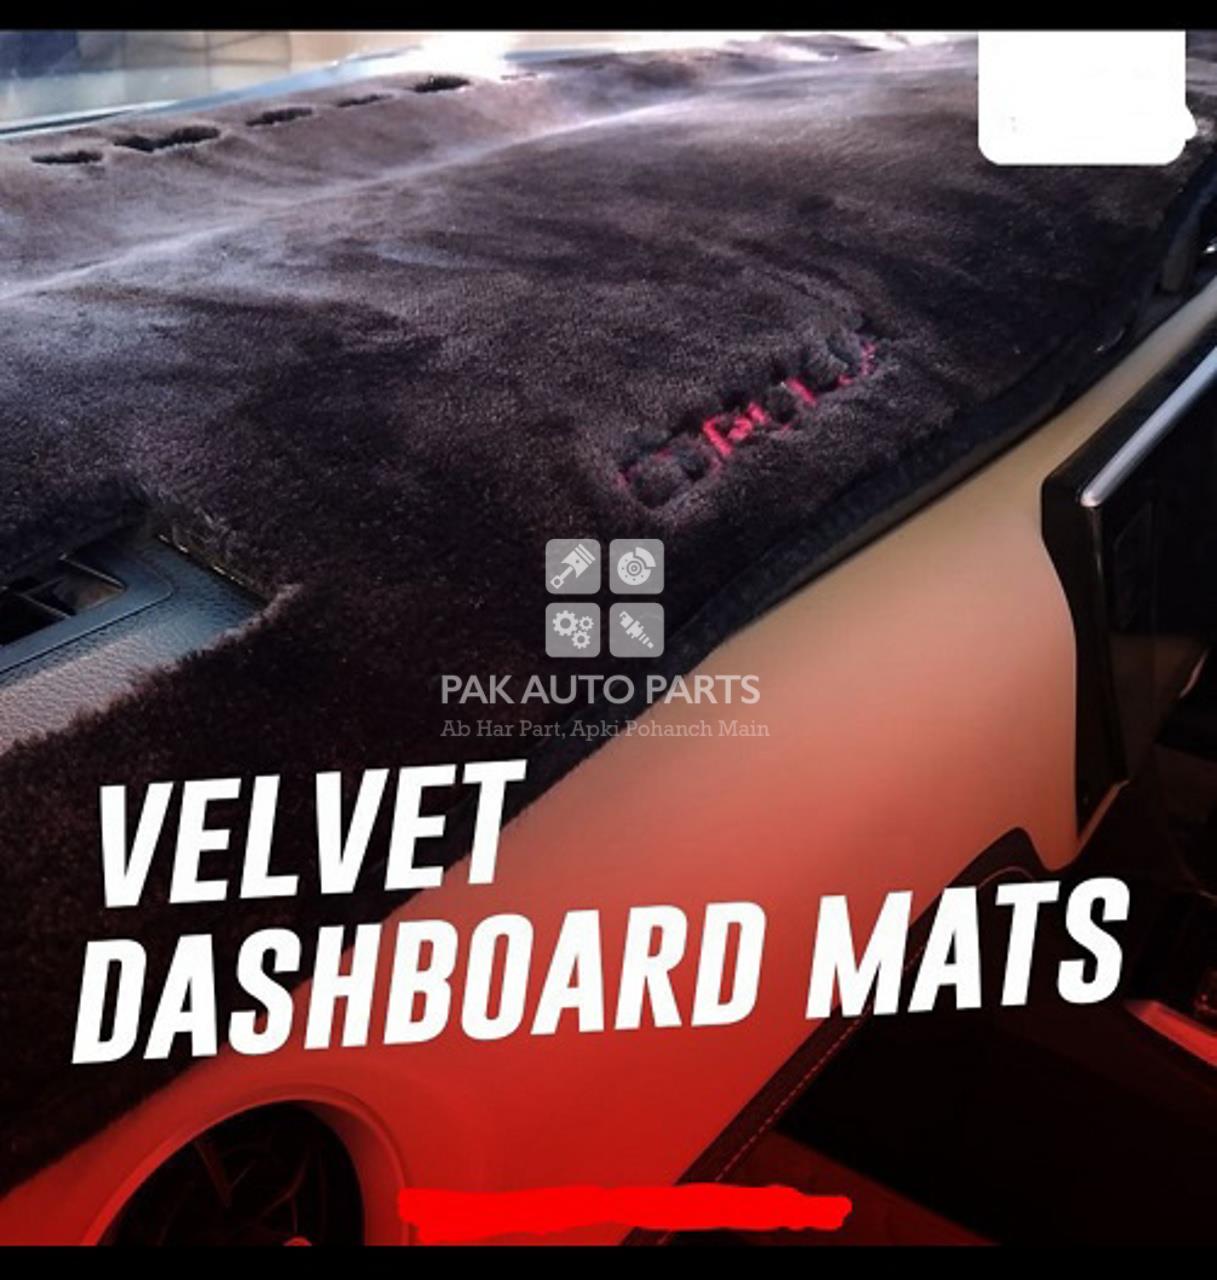 Picture of New MG-HS Fur Non- Slip Dashboard Mat Cover Premium Quality.